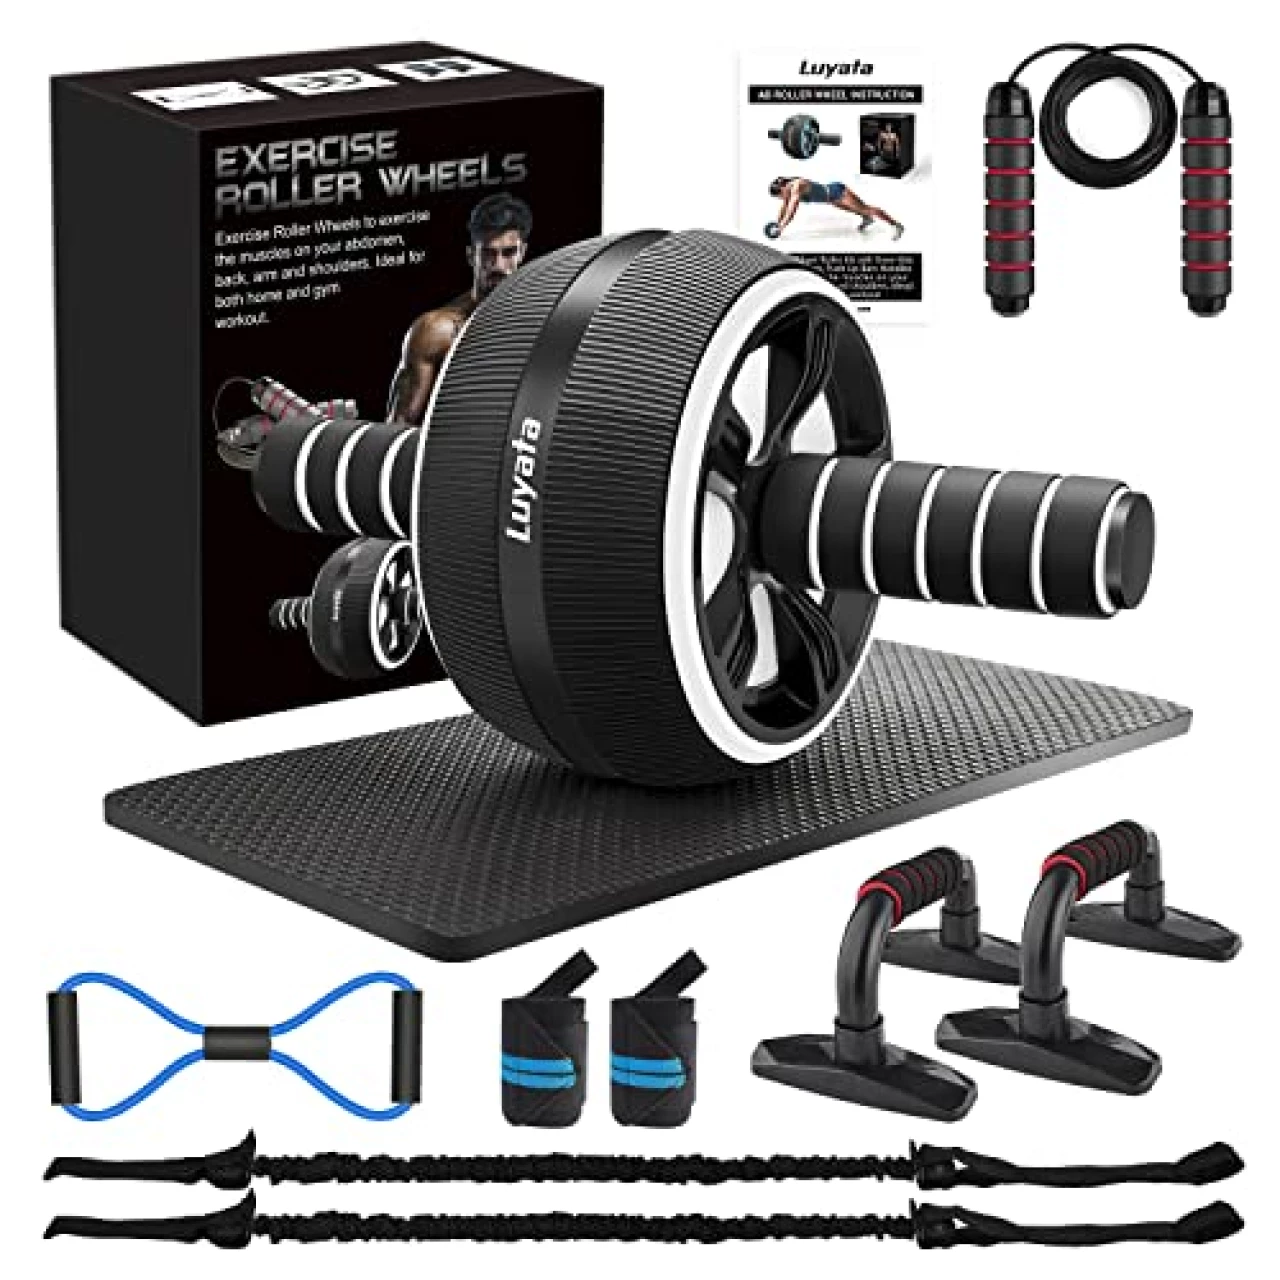 Ab Roller Wheel, 10-In-1 Ab Exercise Wheels Kit with Resistance Bands, Knee Mat, Jump Rope, Push-Up Bar